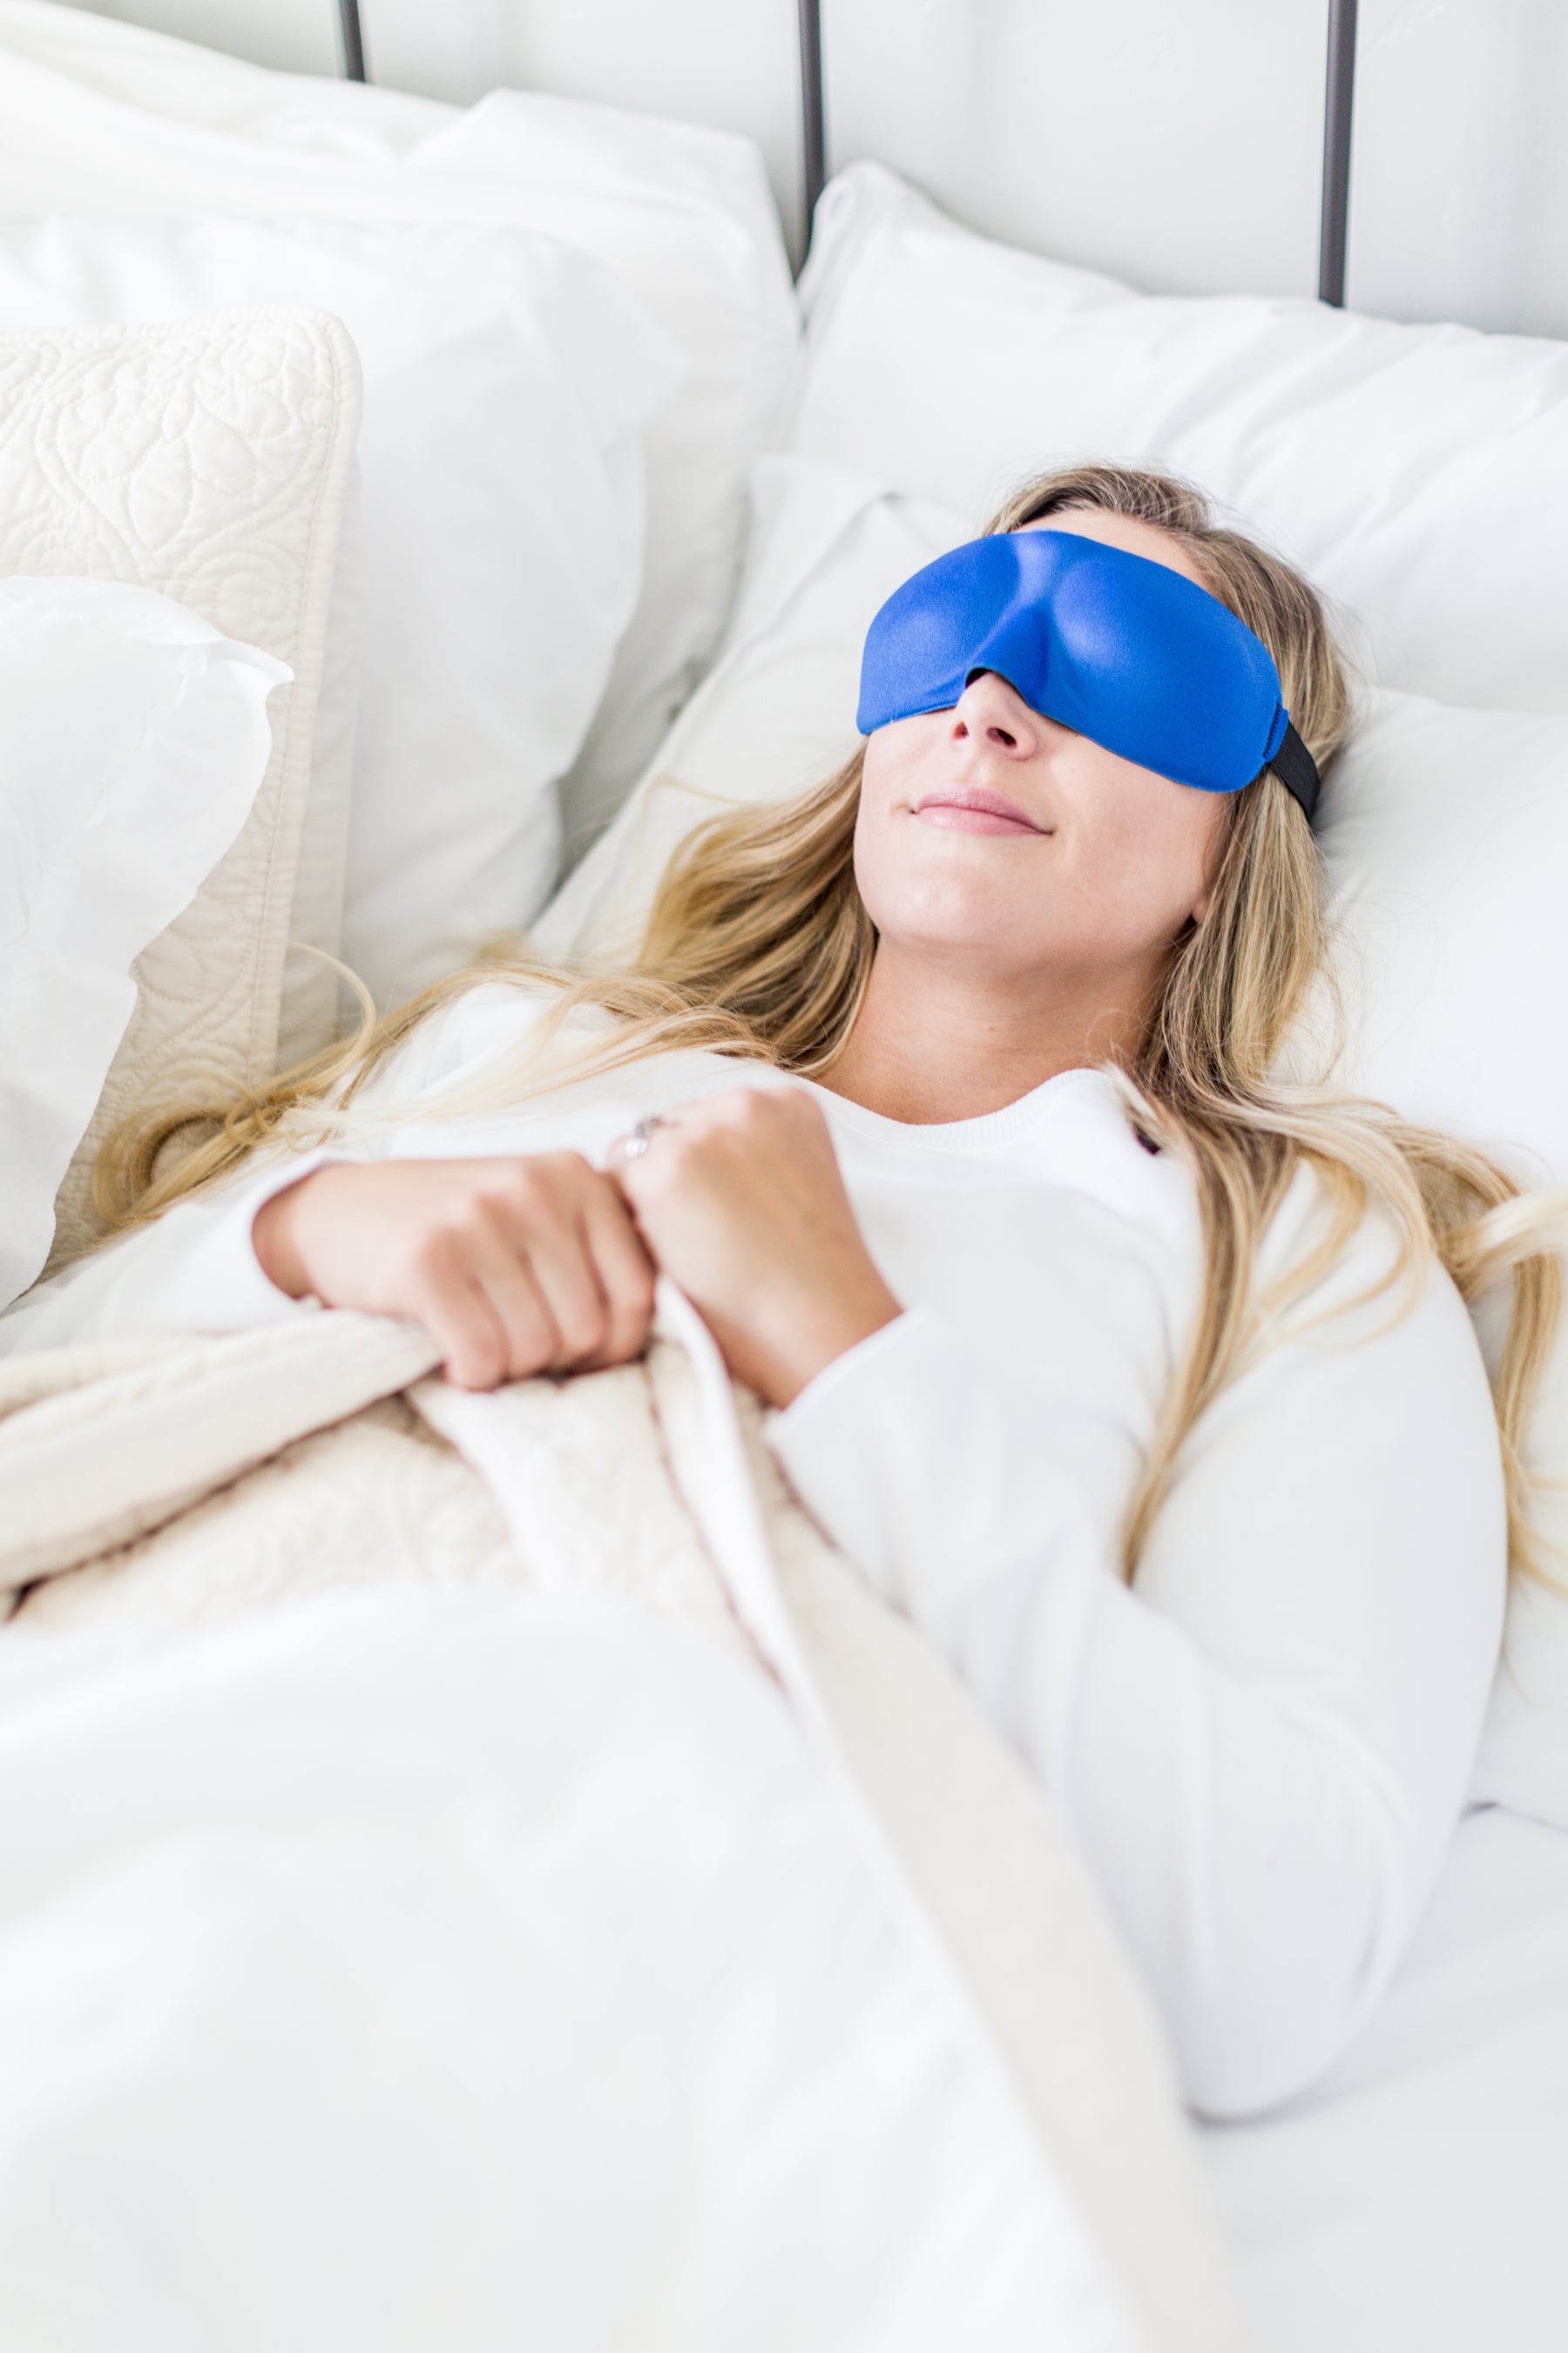 Sleep positions reveals your personality